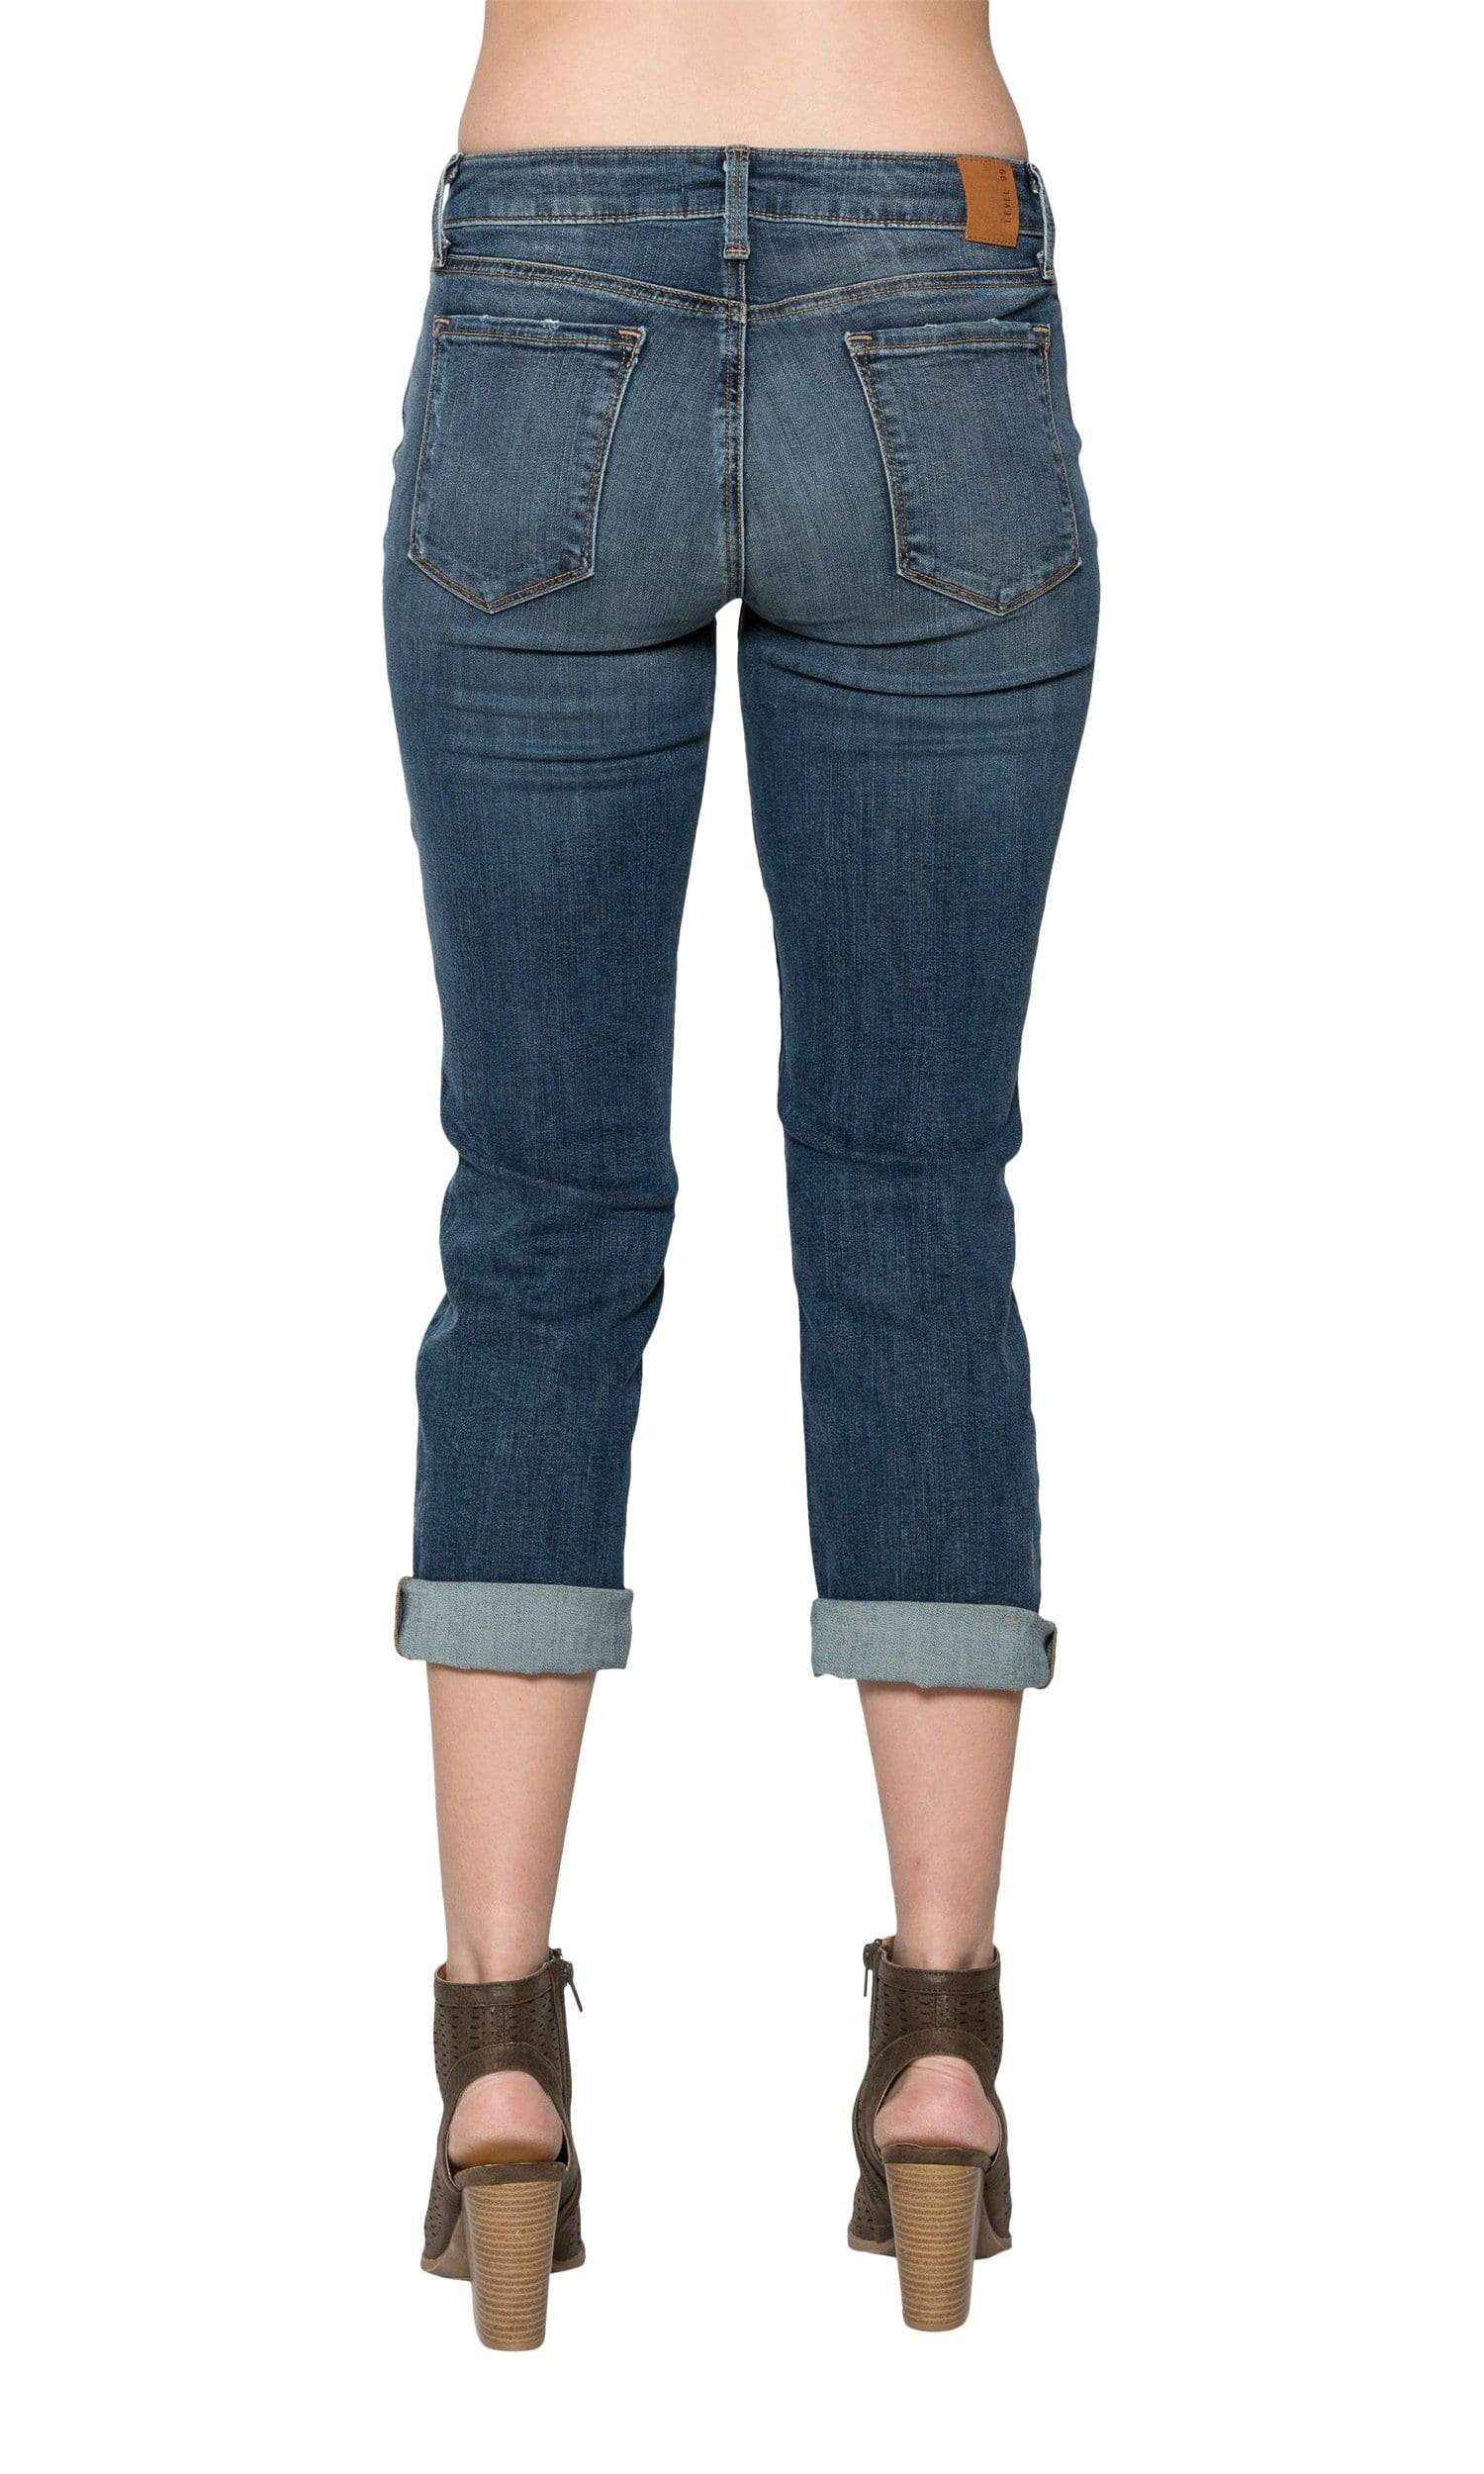 Jeans for Women | Cato Fashions